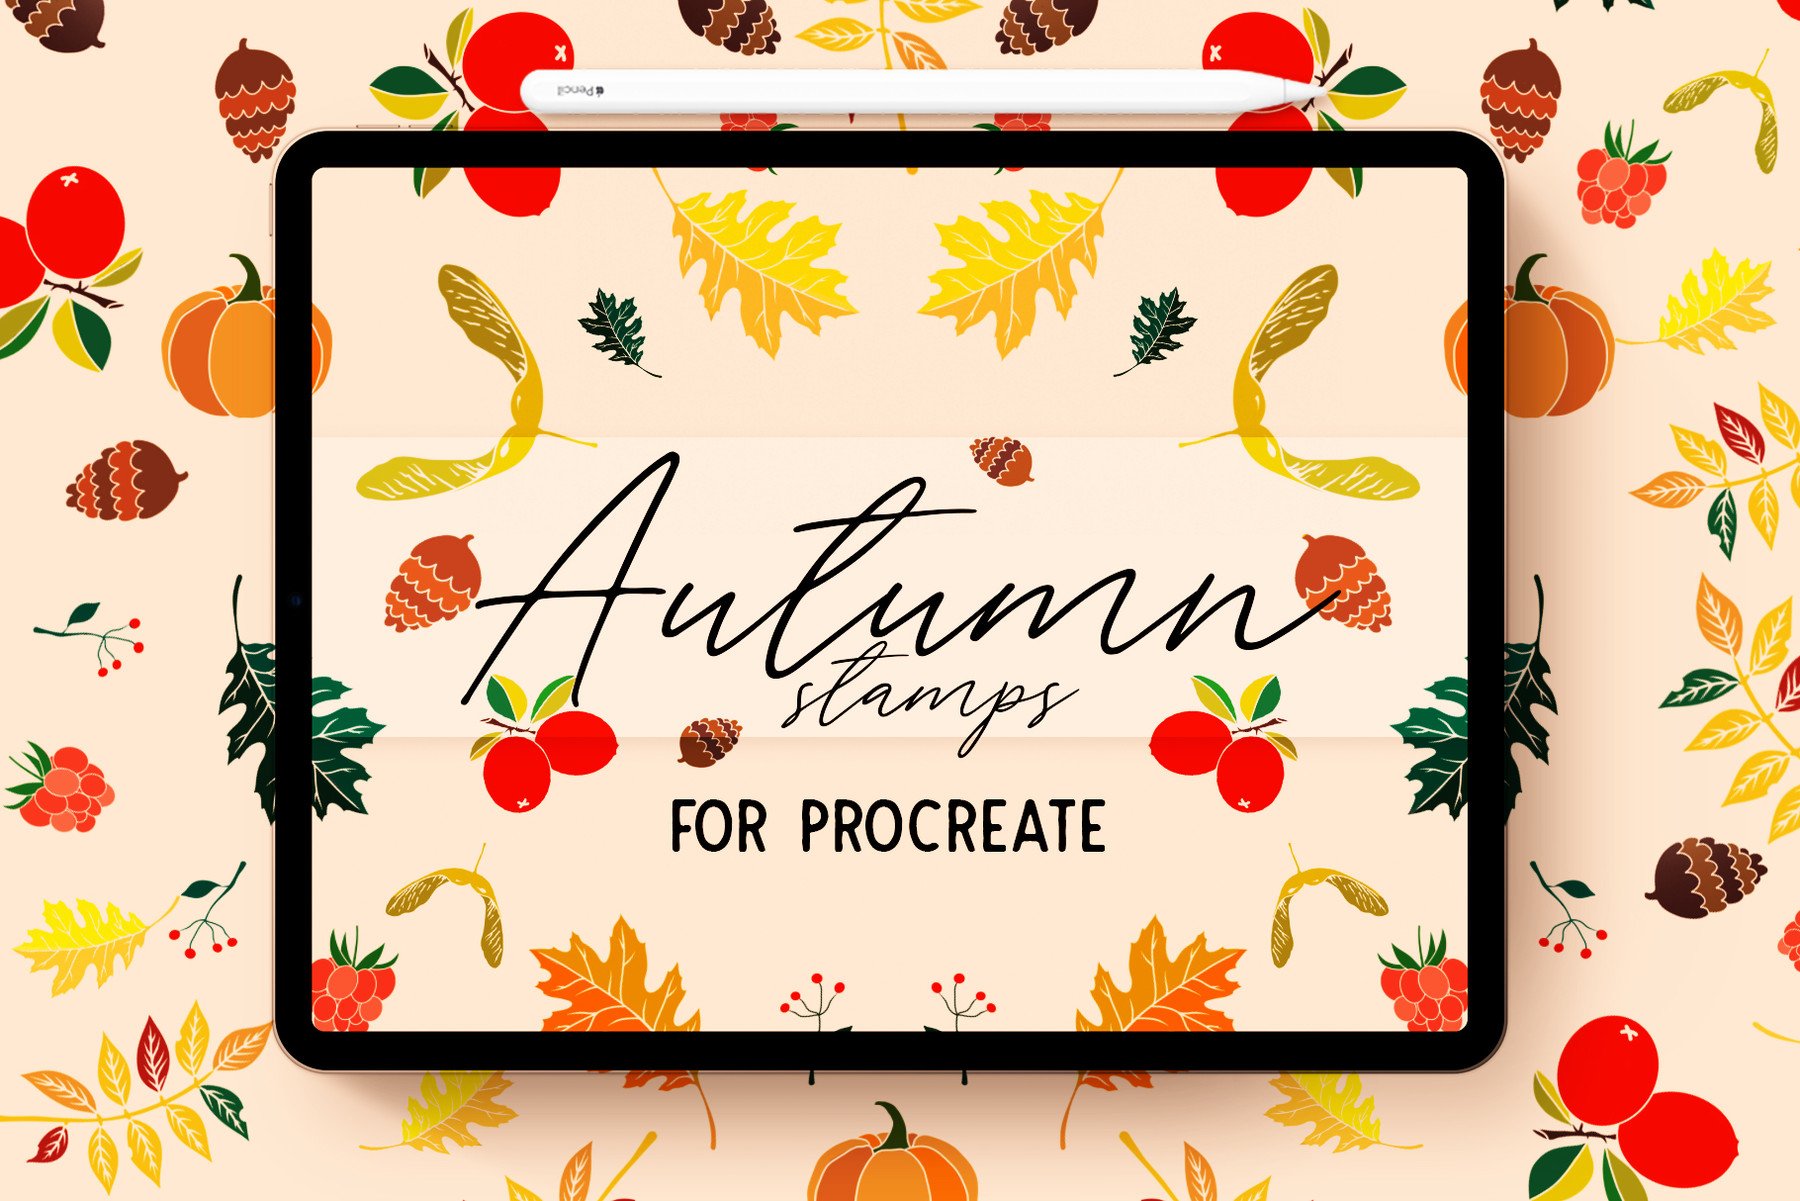 Procreate Stamps Autumn Collection digital iPad Pro Stamps Illustration leaves pumpkin brushes 30 procreate pack